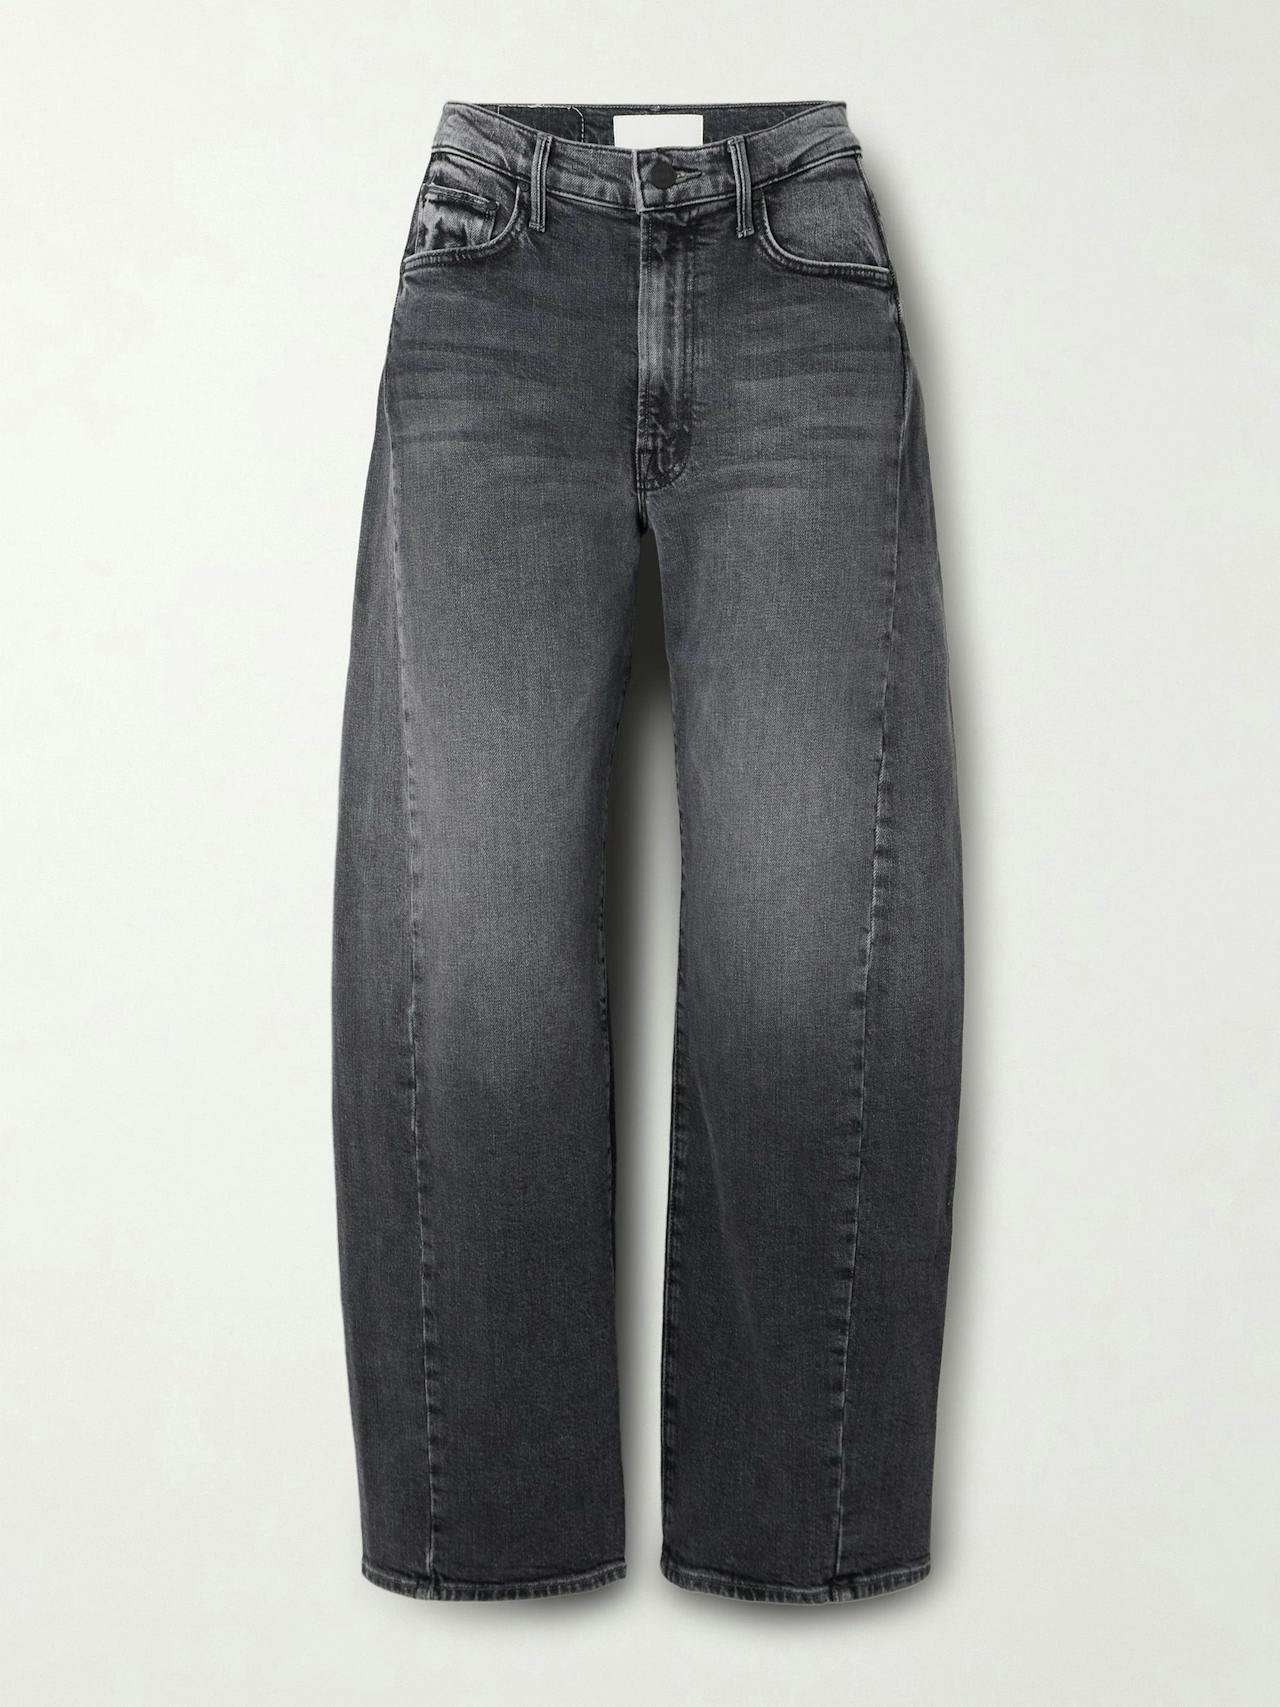 The Half Pipe Flood high-rise wide-leg jeans